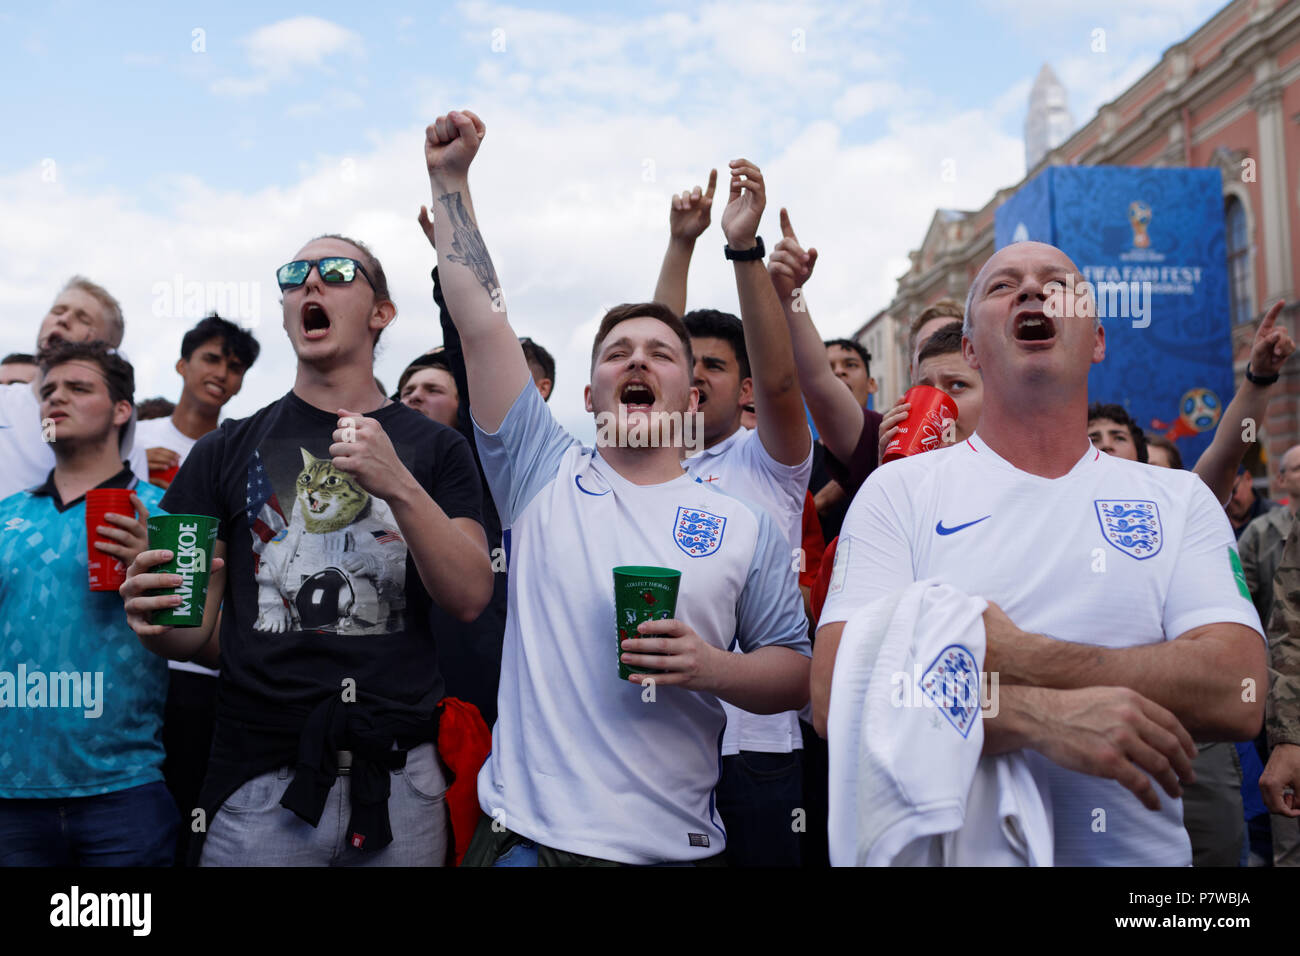 St. Petersburg, Russia - July 7, 2018: English football fans at FIFA Fan Fest in Saint Petersburg watch the quarterfinal match of FIFA World Cup 2018  Stock Photo